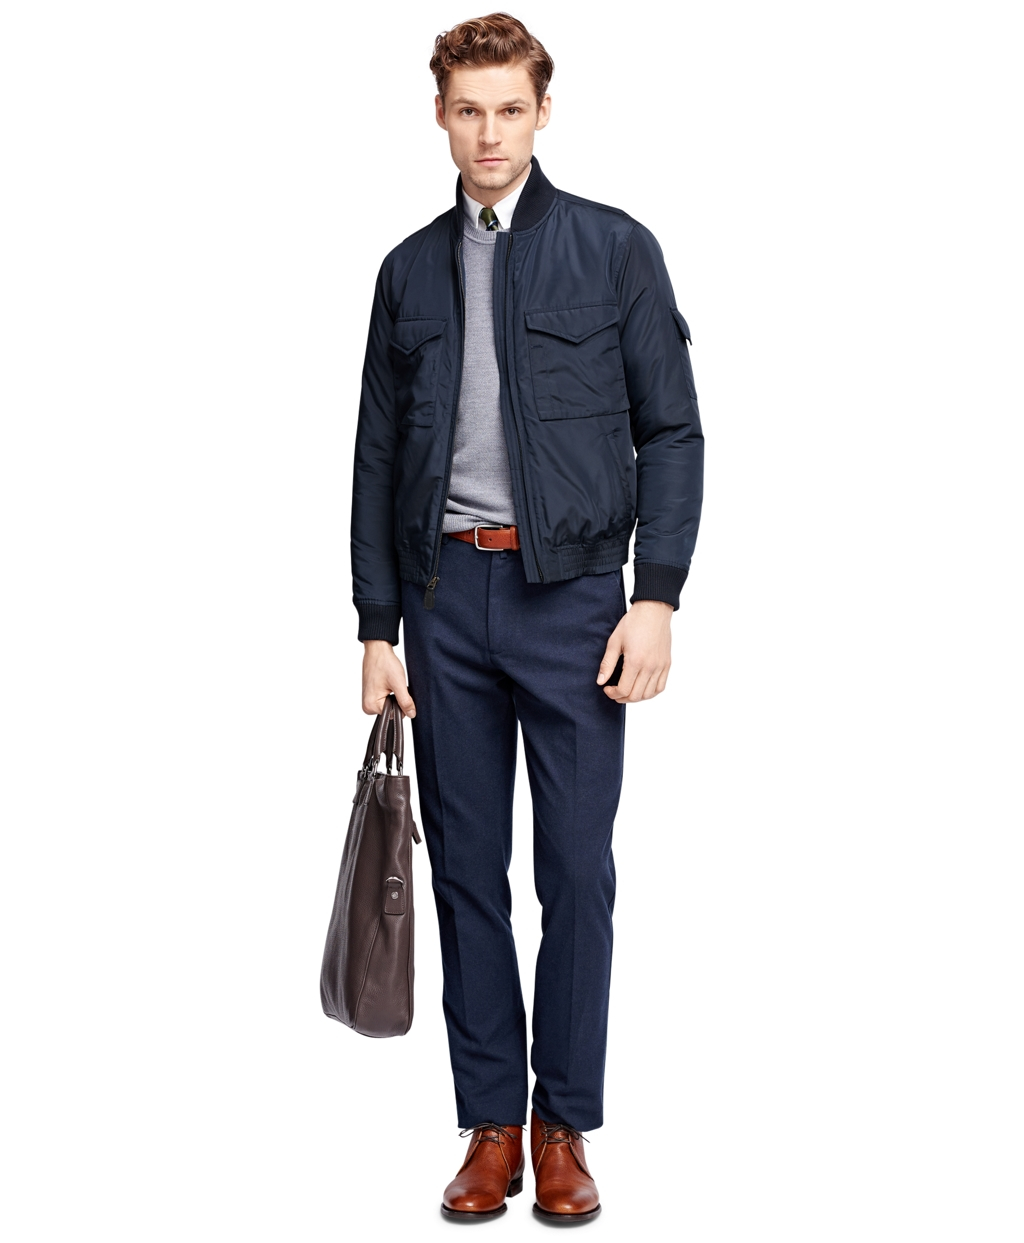 Lyst - Brooks Brothers Bomber Jacket in Blue